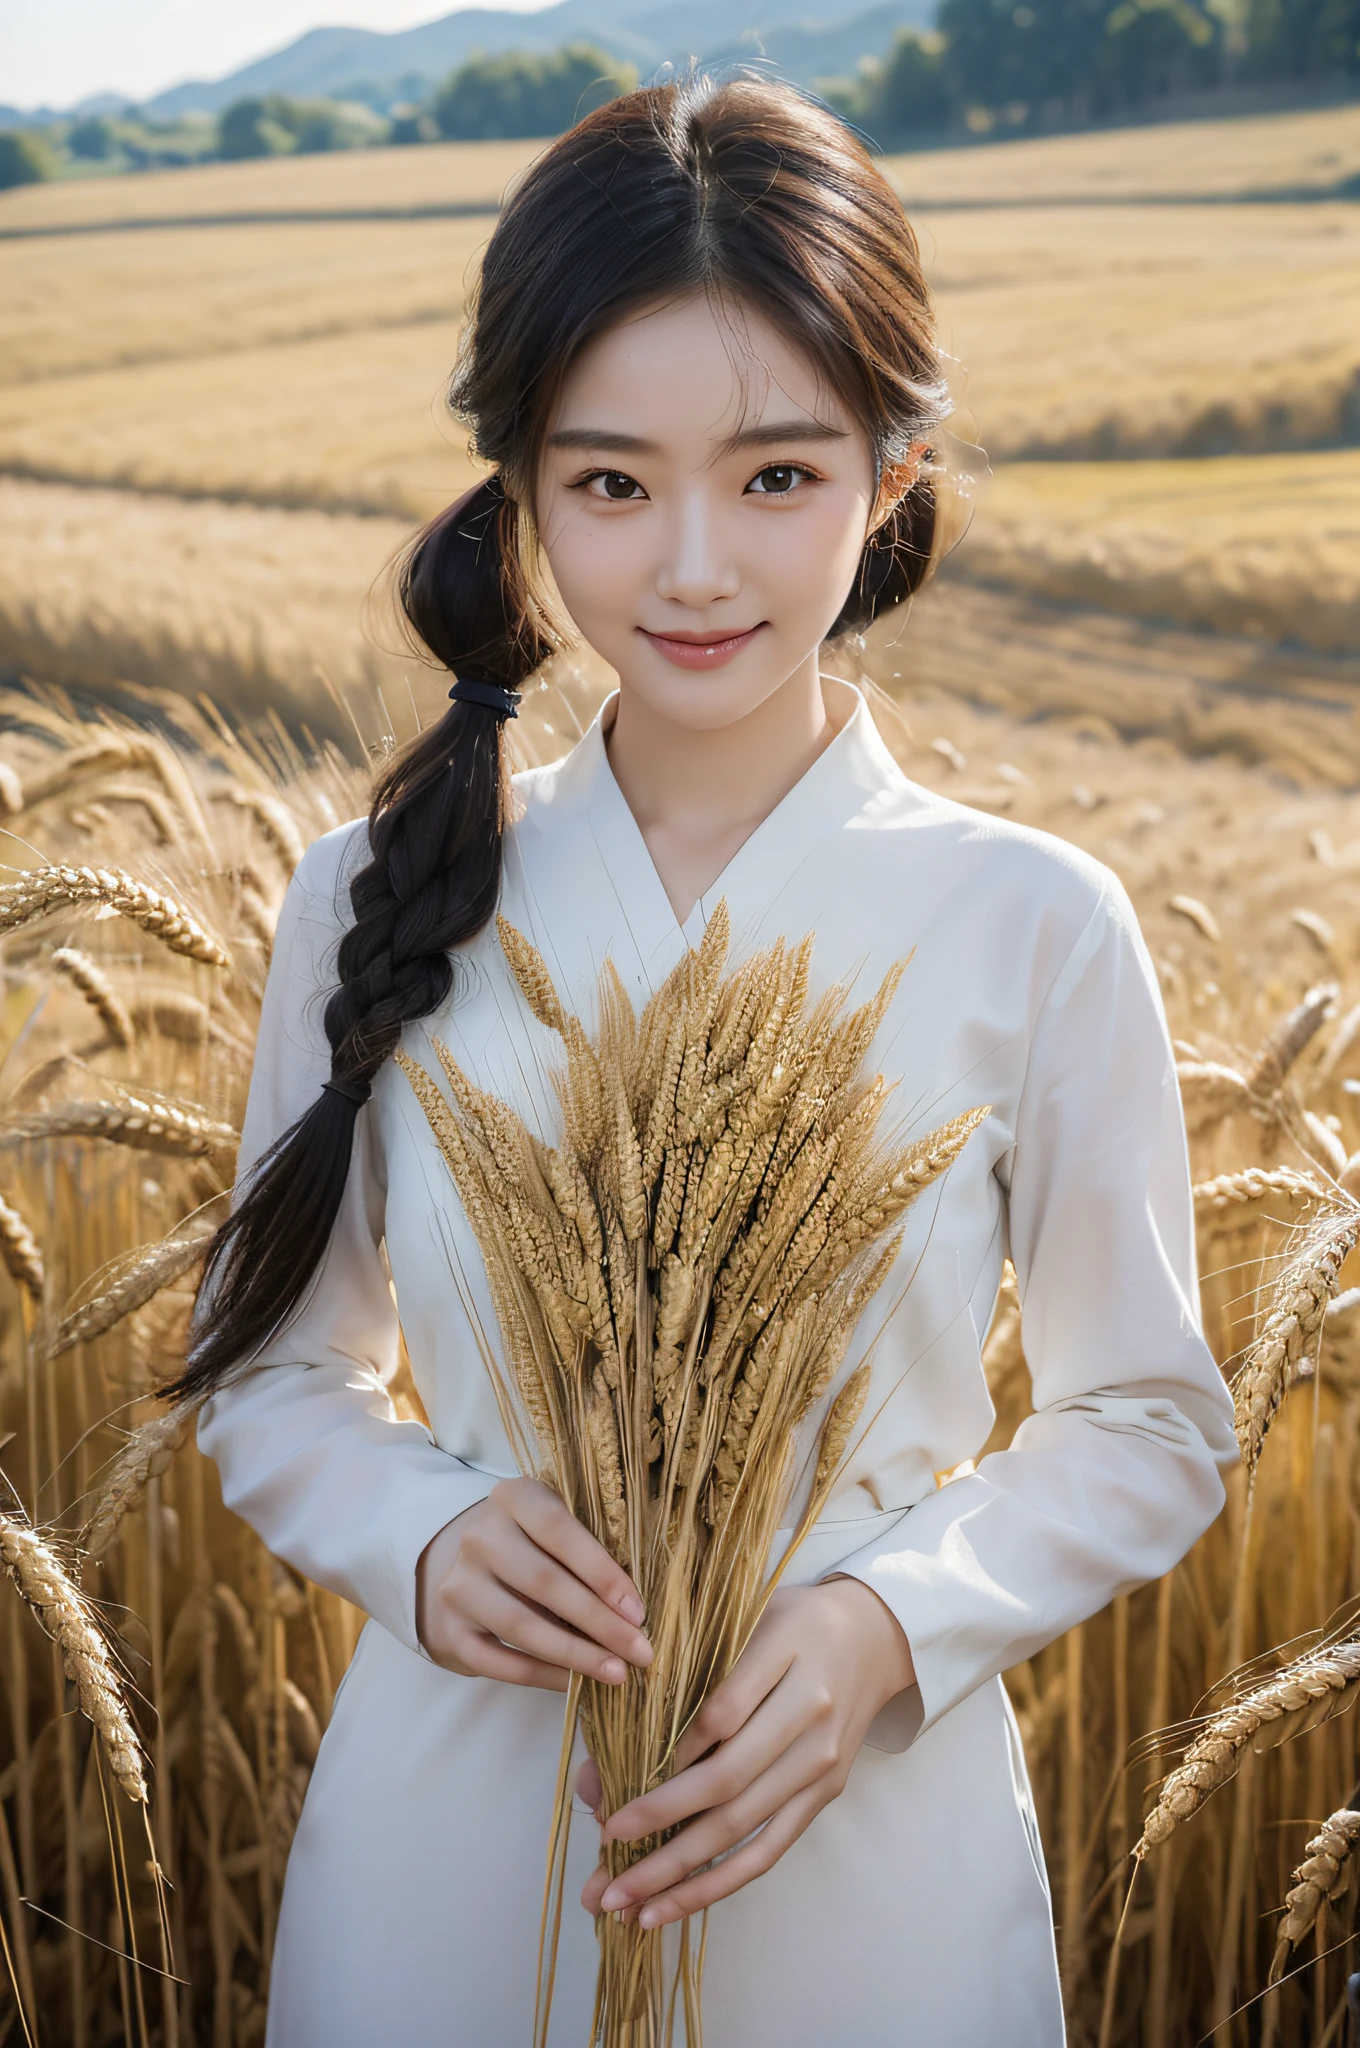 Korean woman, (Masterpiece, Beautiful people, Contaminated smile), Virtual Youku, Farm work in the countryside, (are present (Cut the wheat: 1.4)), fertilize, Weeding, plain face, No makeup, Country Girl, pony tails, Detailed skin texture, Detailed cloth texture, finerly detailed face. Masterpiece, Slim waist, Slim body.